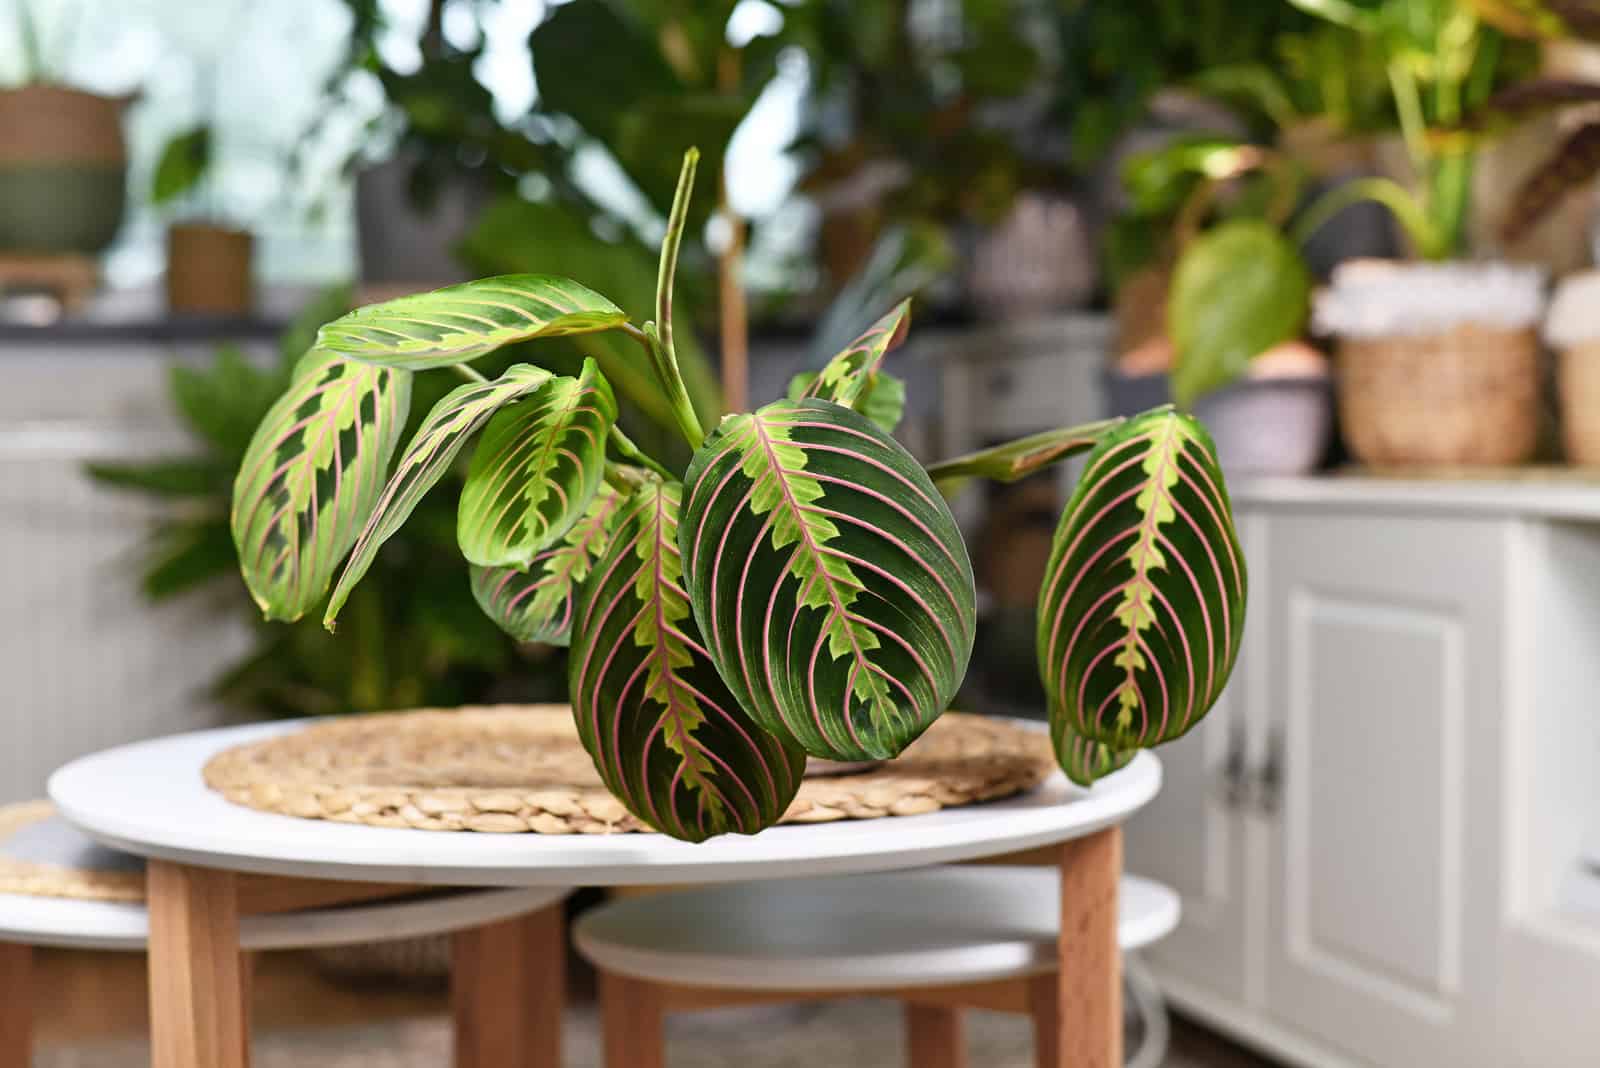 11 Reasons You May See Your Prayer Plant Drooping & How To Fix It